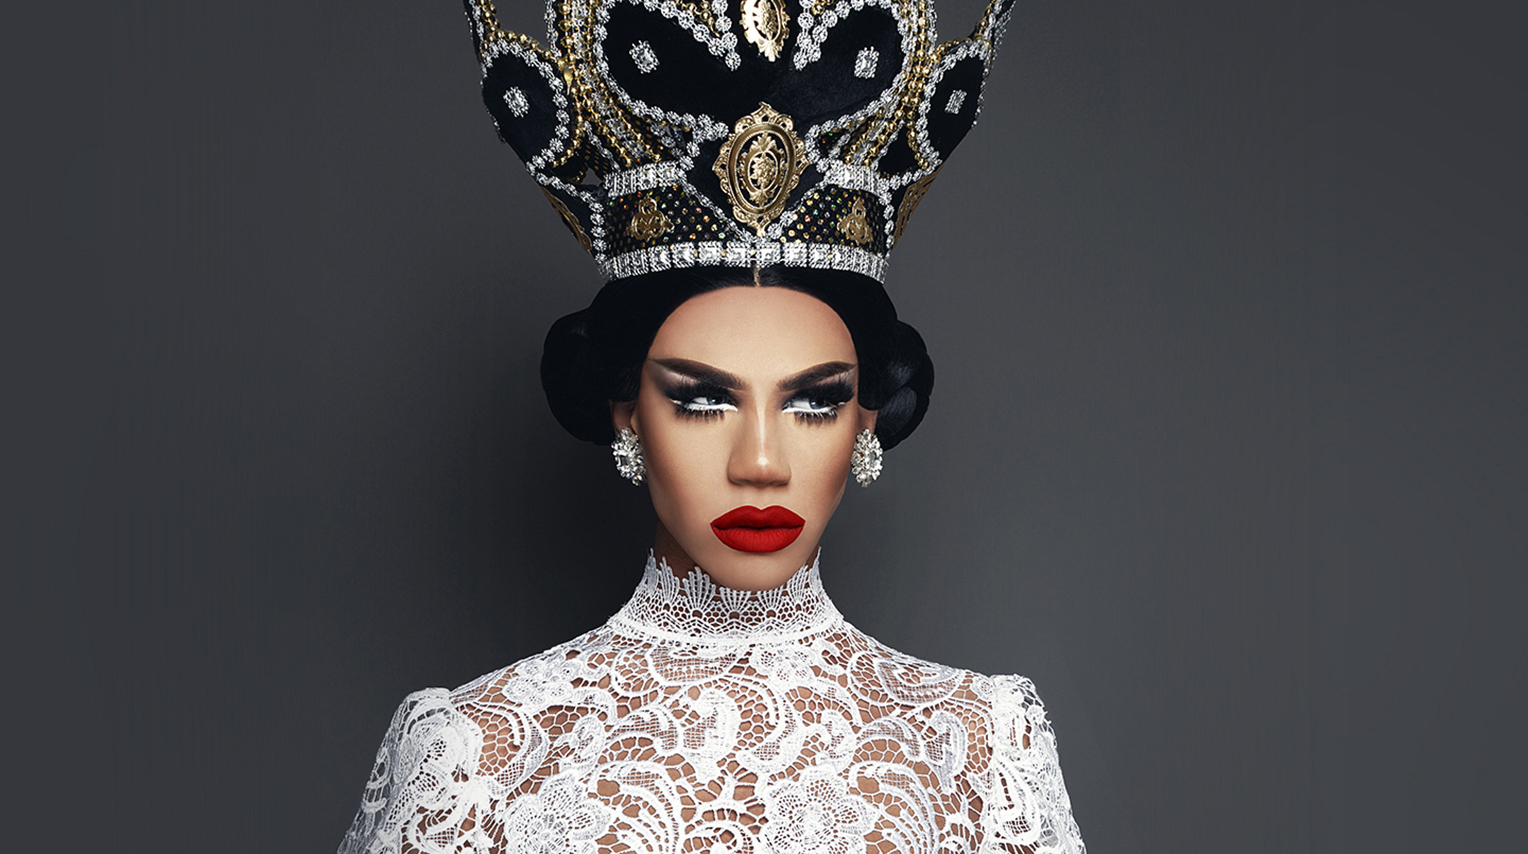 Naomi Smalls wearing top of intricate lace and a bejeweled crown